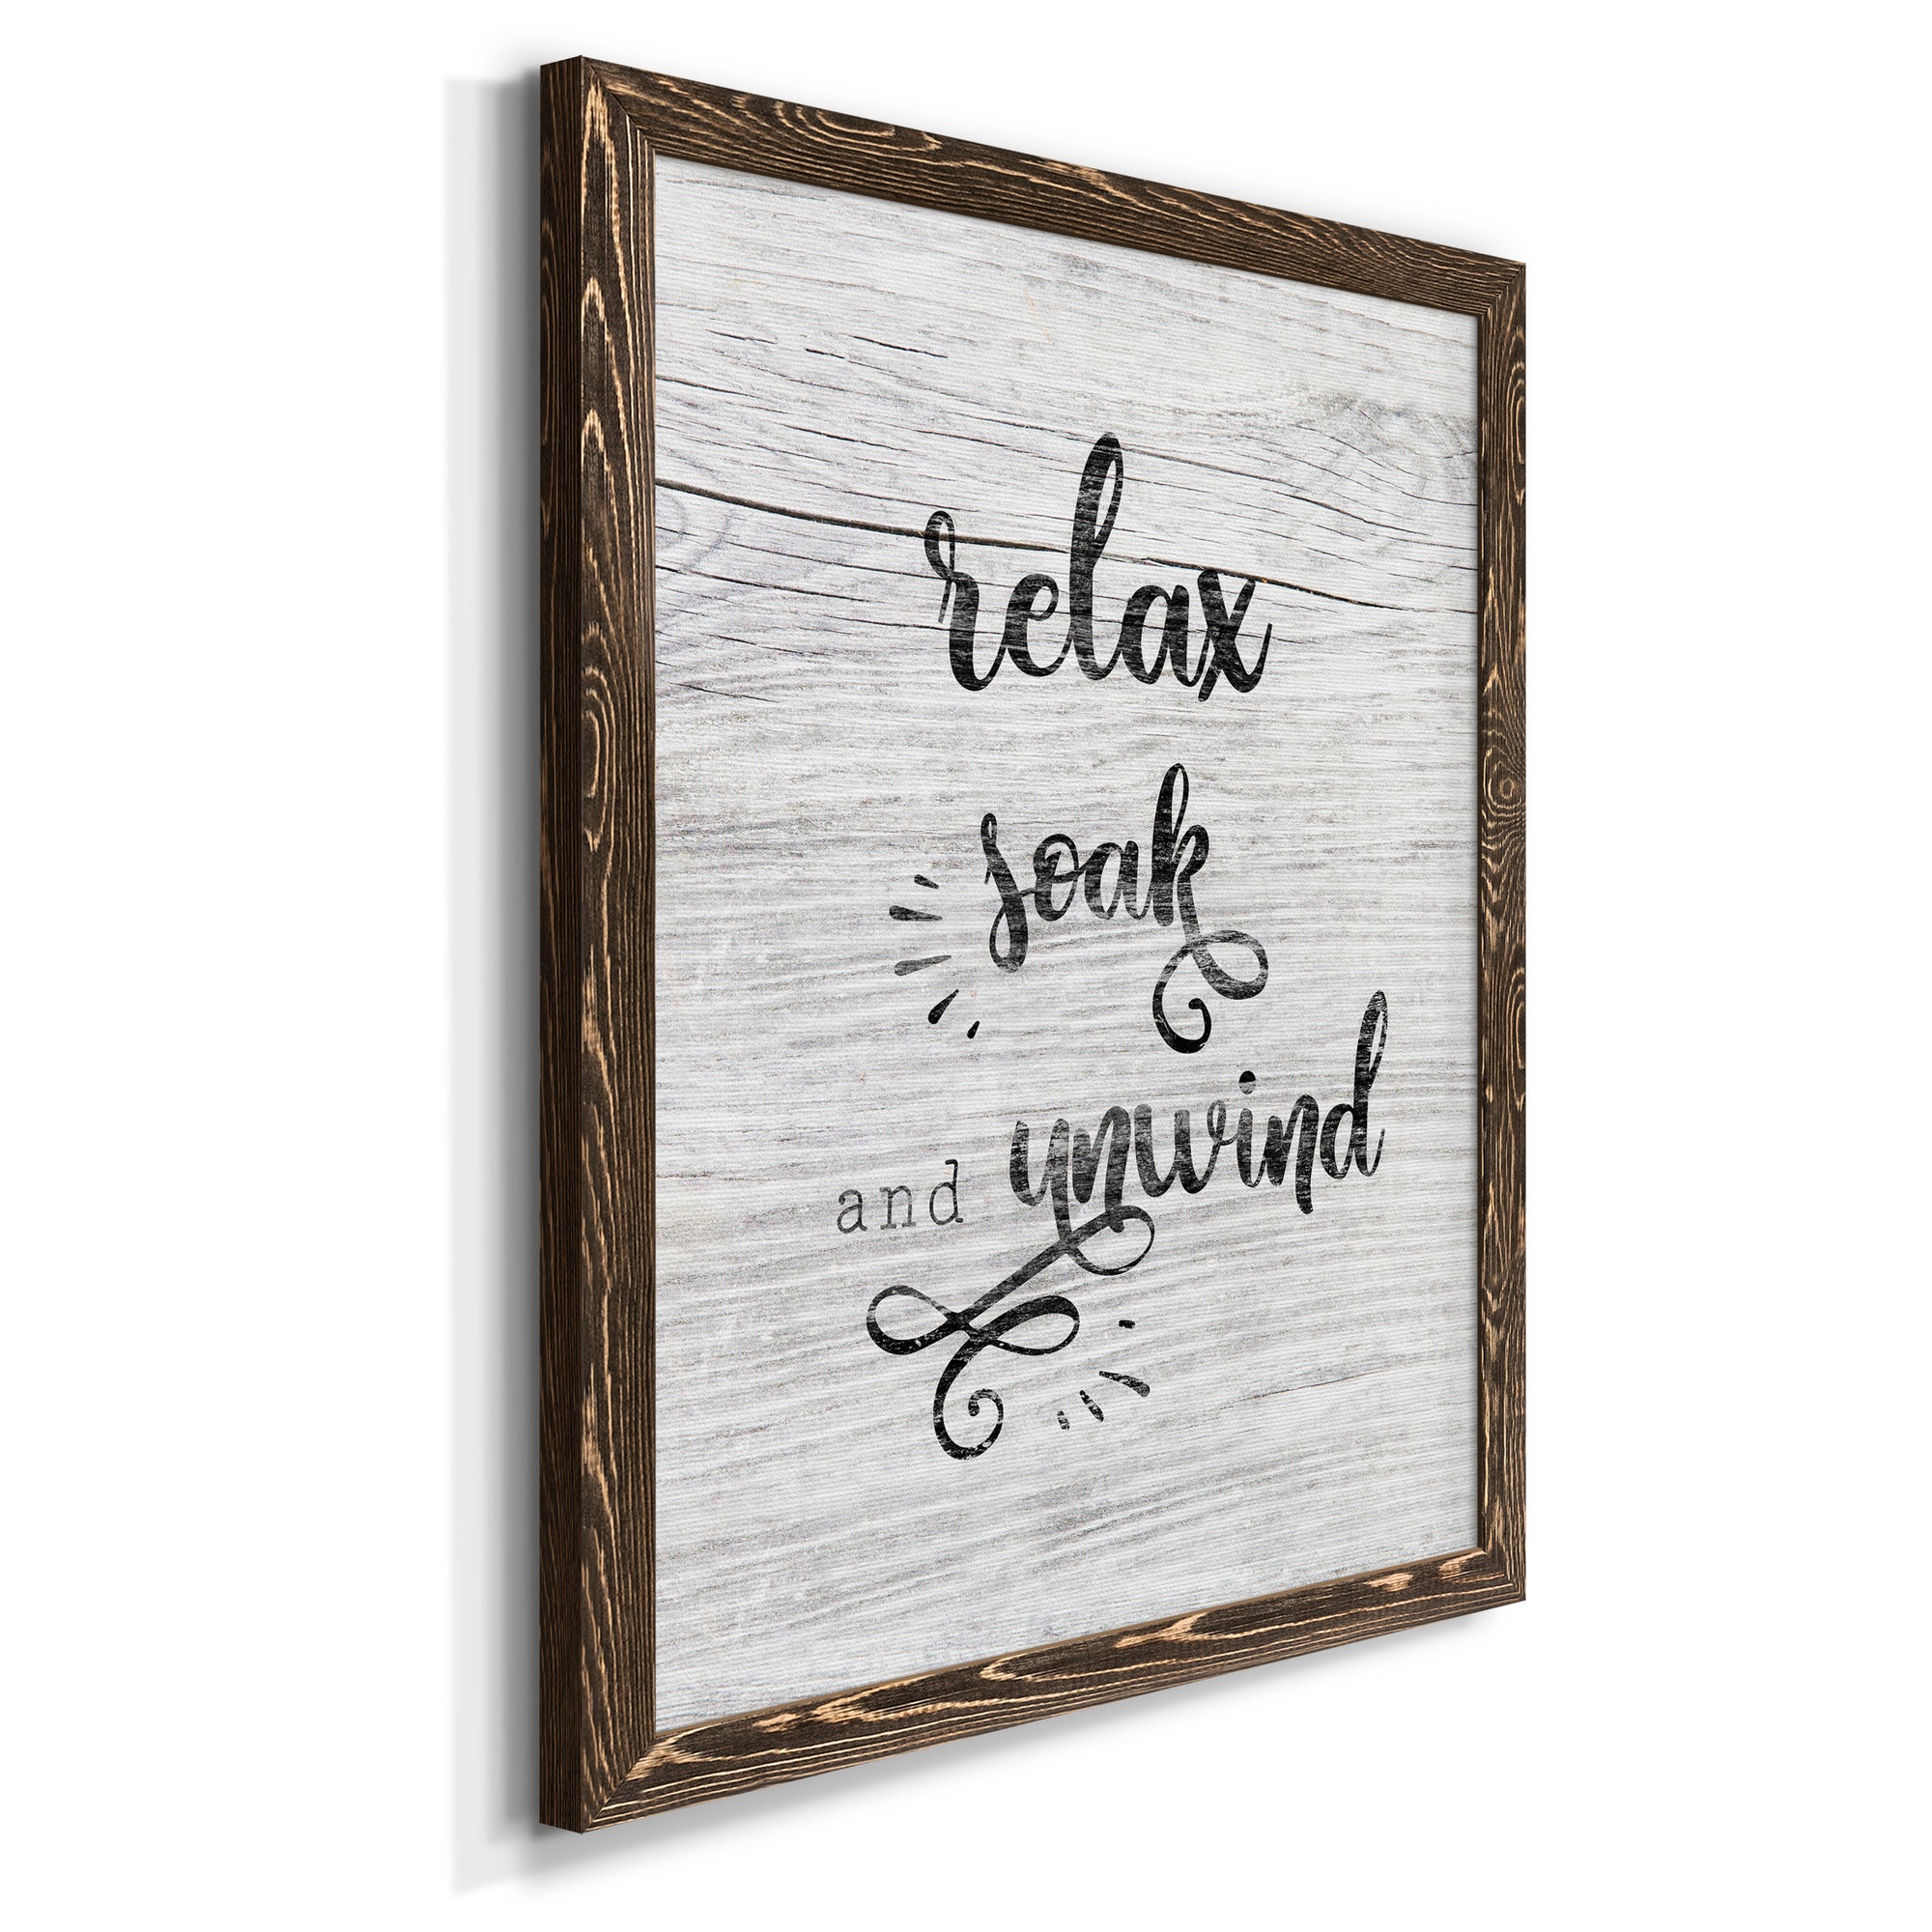 Relax Soak Unwind - Premium Canvas Framed in Barnwood - Ready to Hang